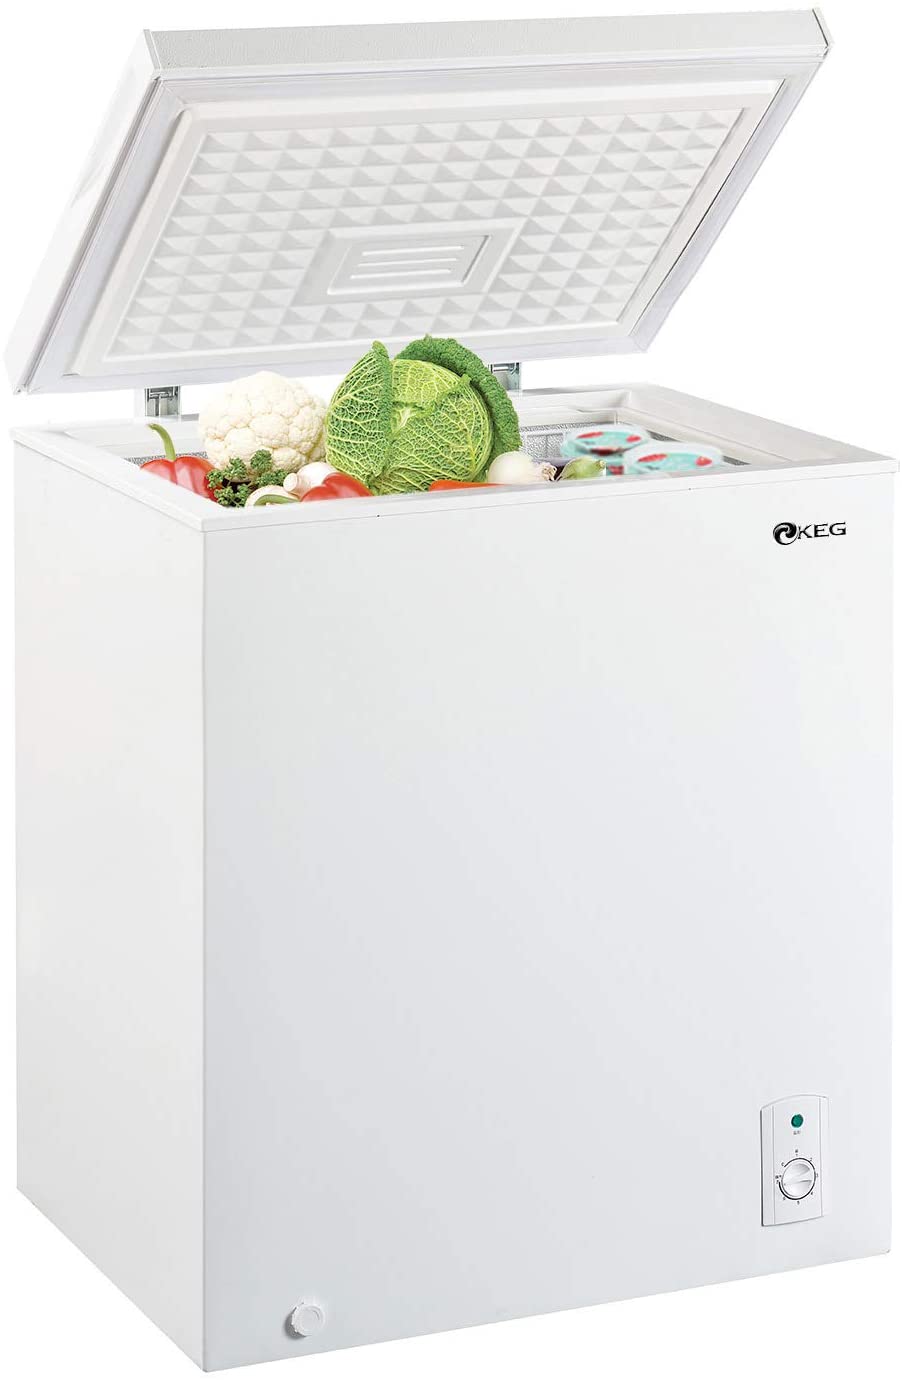 10 BEST 5 Cu Ft CHEST FREEZER: SMALL DEEP FREEZER 2022 REVIEW All In One Cooling Gear Lab: Any Refrigerators Air Conditioners Freezers Ice Makers Coolers Fans Reviewed And Compared.